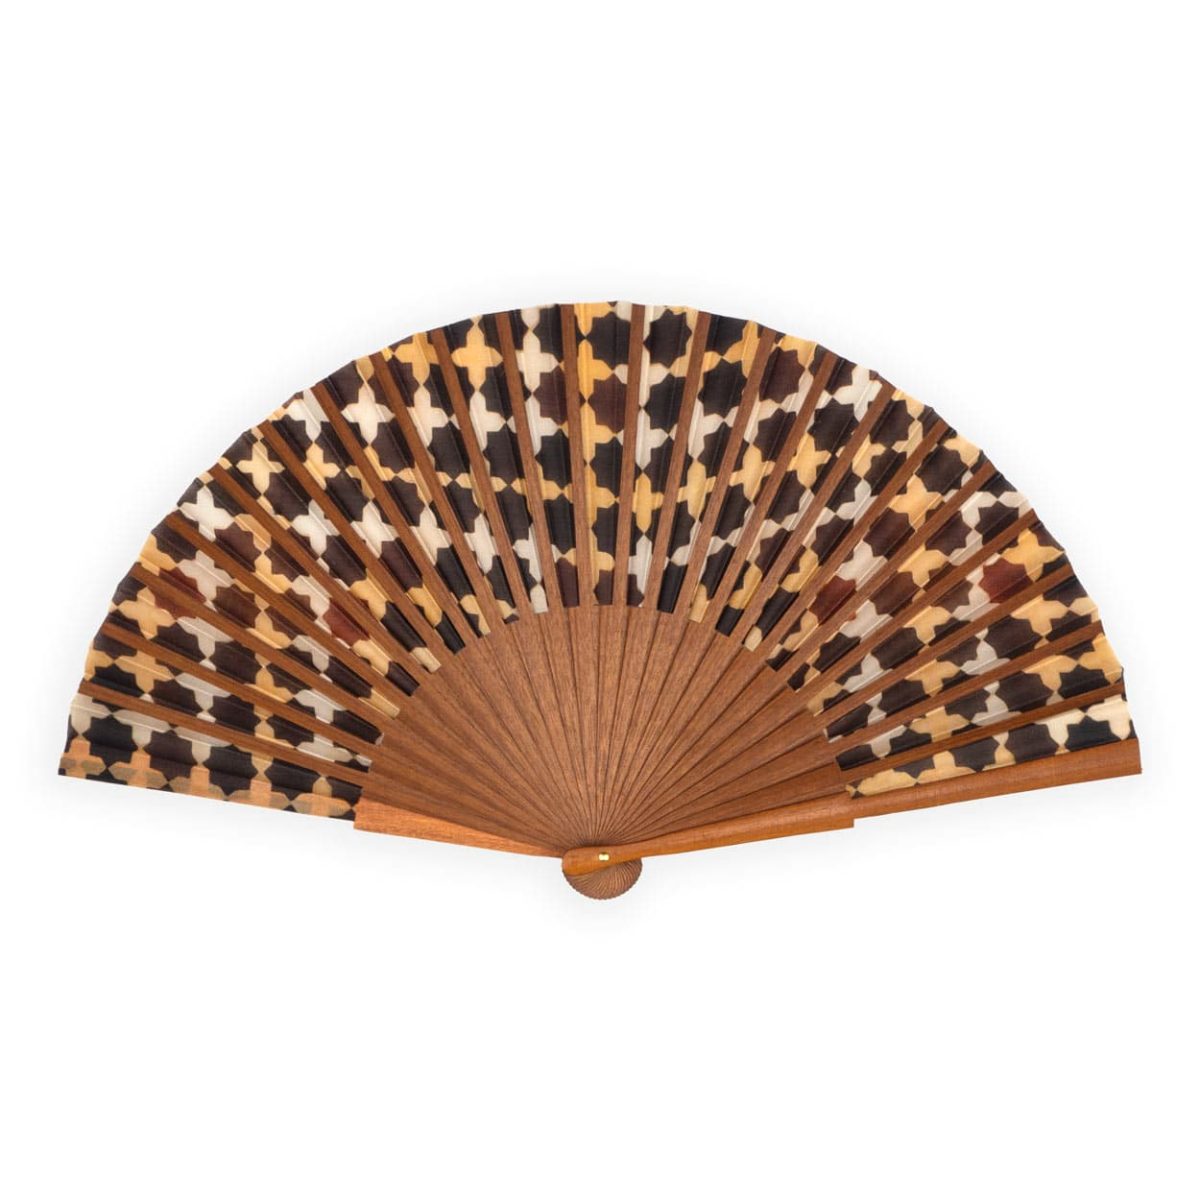 Brown folding fan inspired by moroccan tiles